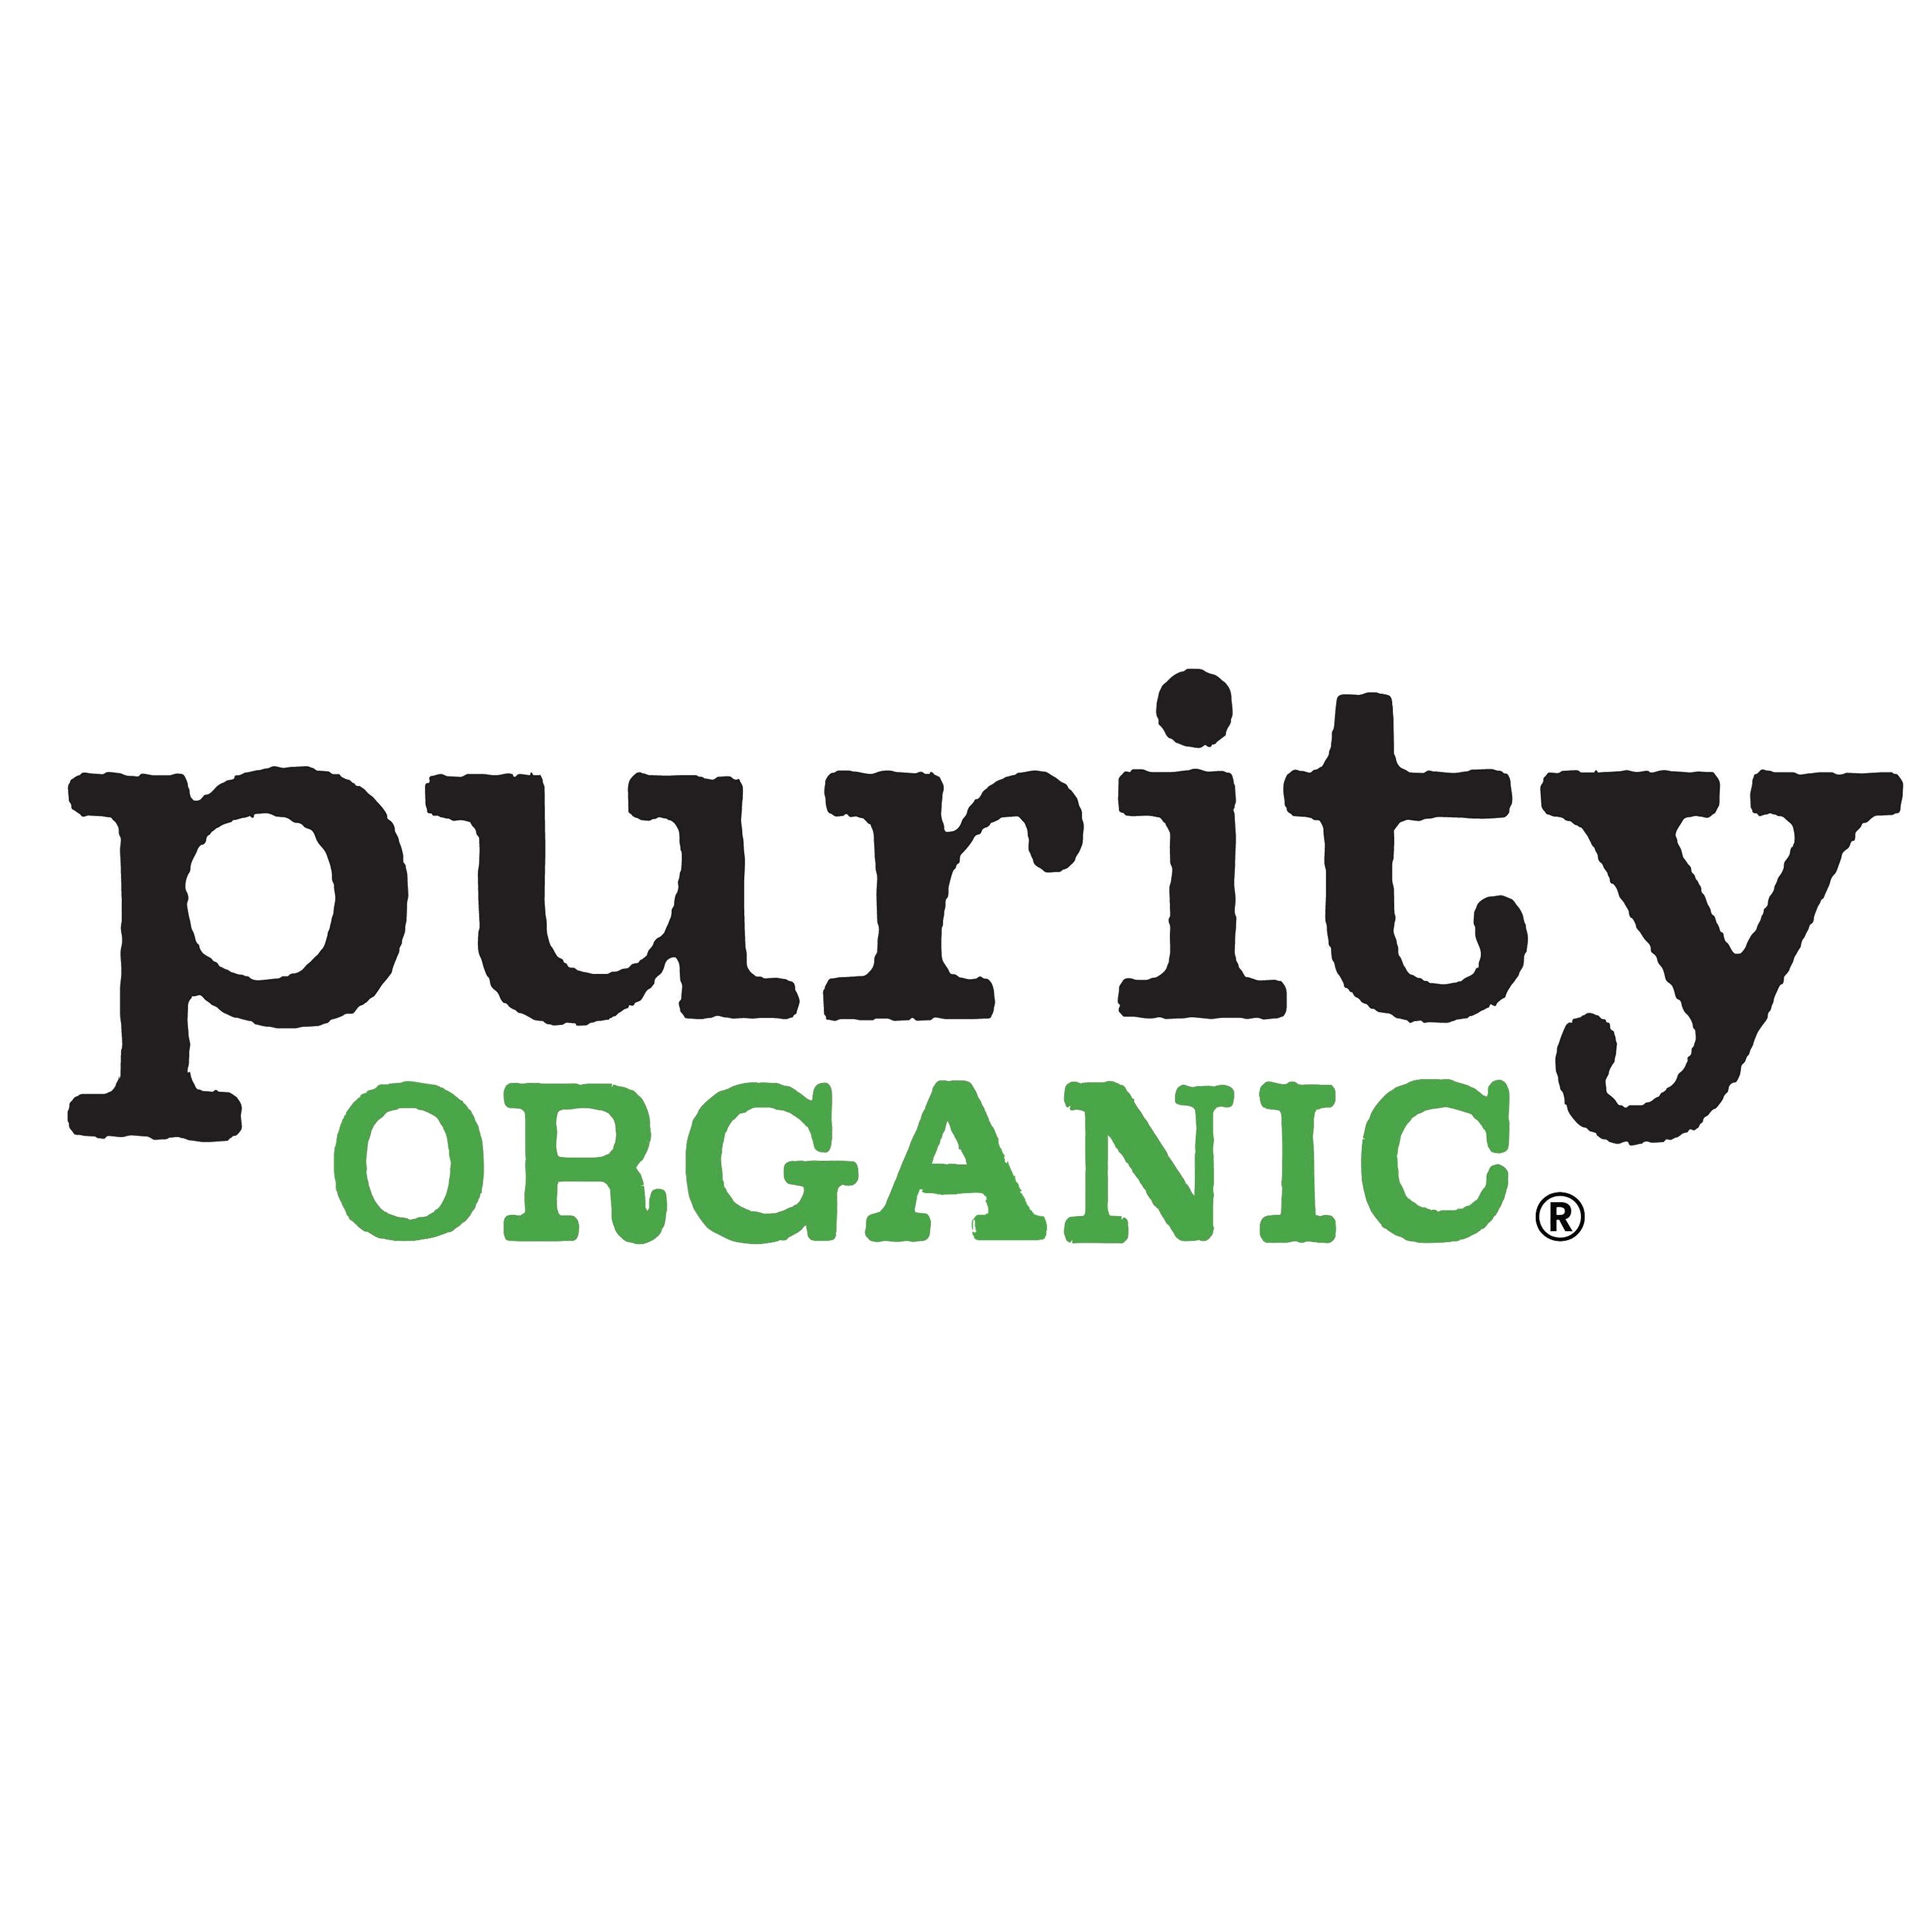 Your body deserves better. Purity Organic is committed to bringing you natural, organic, and delicious coconut waters, sparkling waters, and juices.